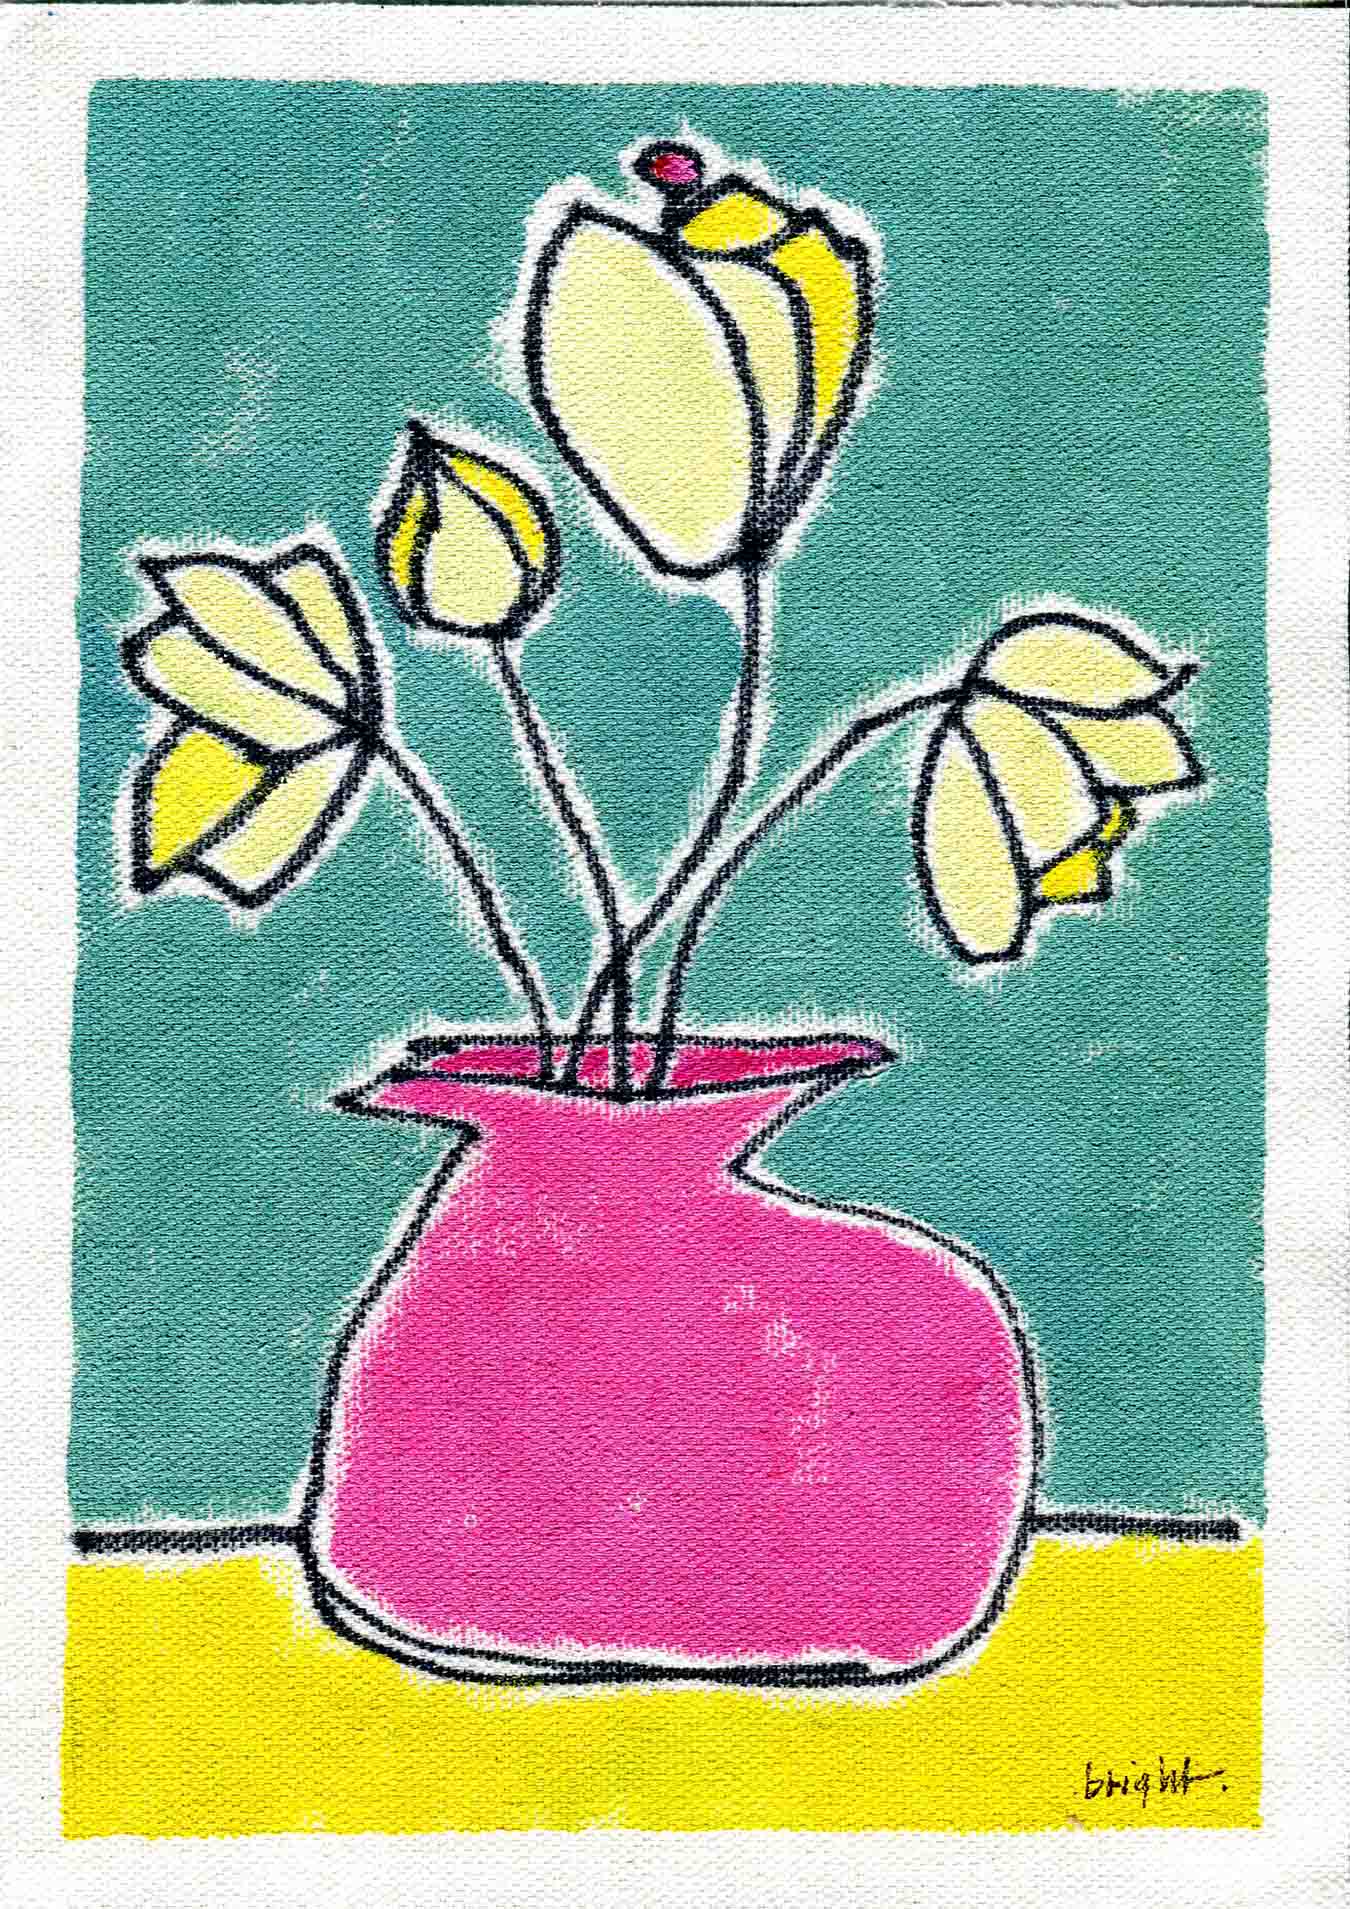 art every day number 137 / drawing / painting / yellow pink blue